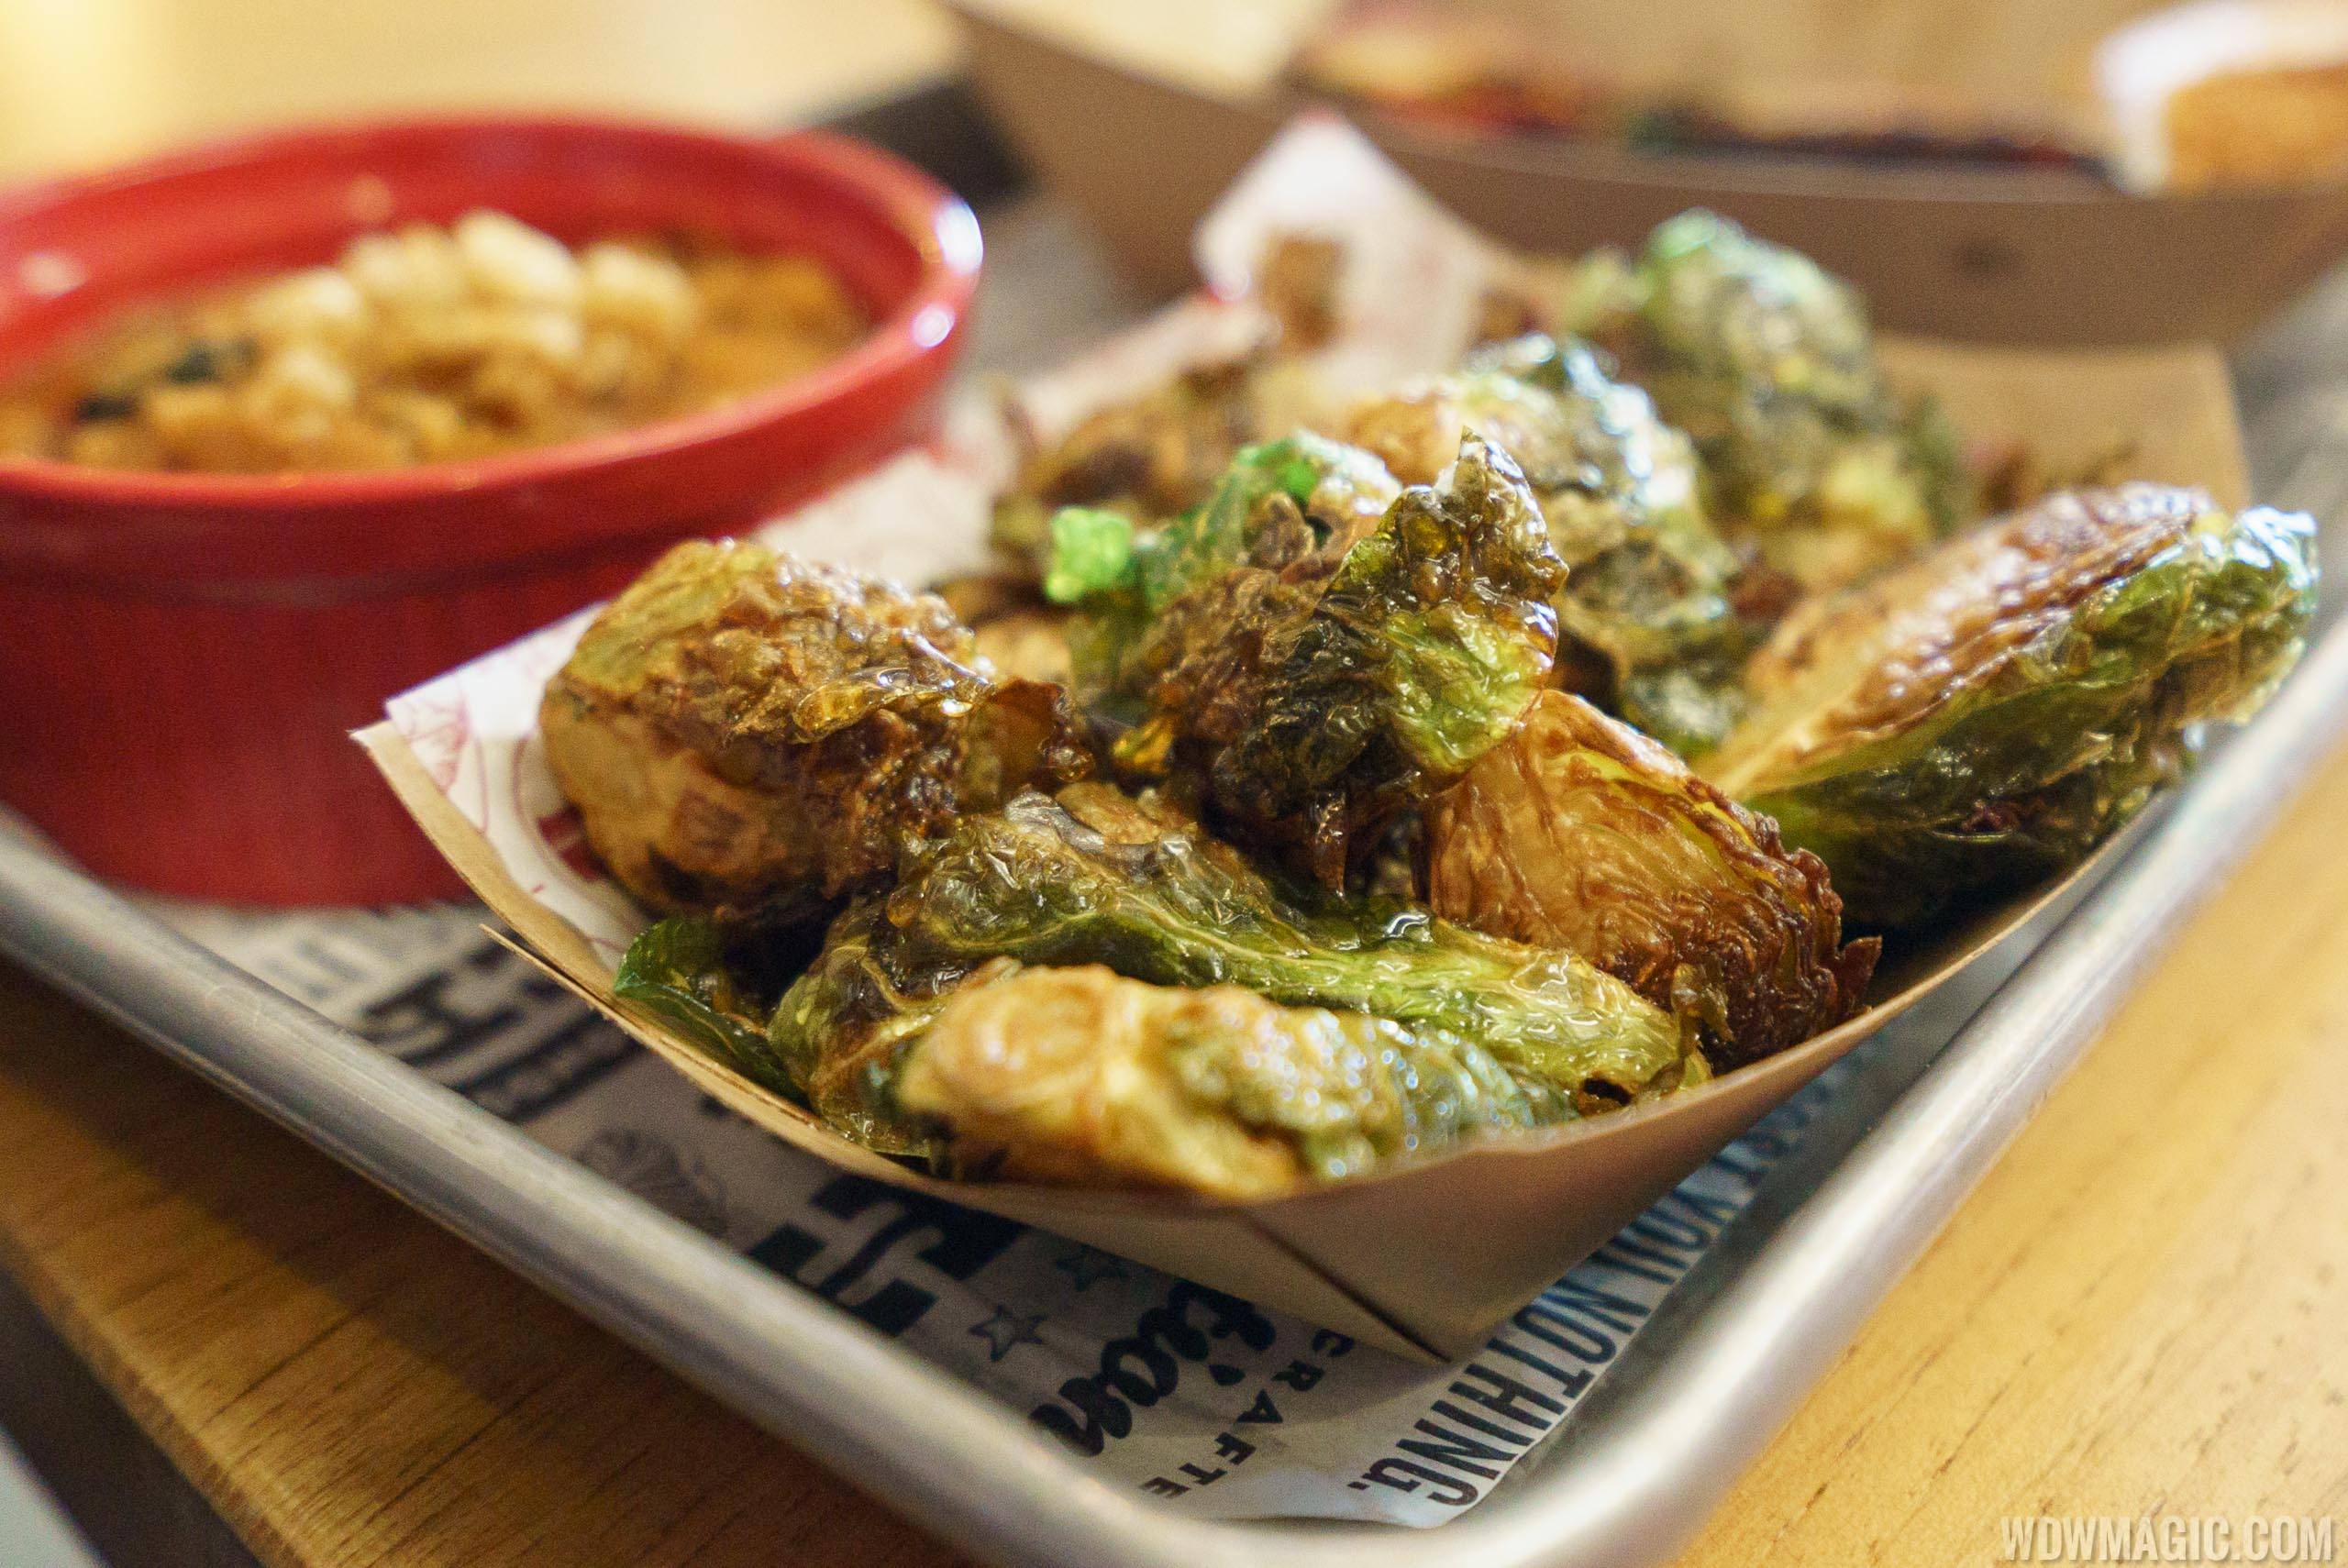 The Polite Pig - Crispy Brussel Sprouts